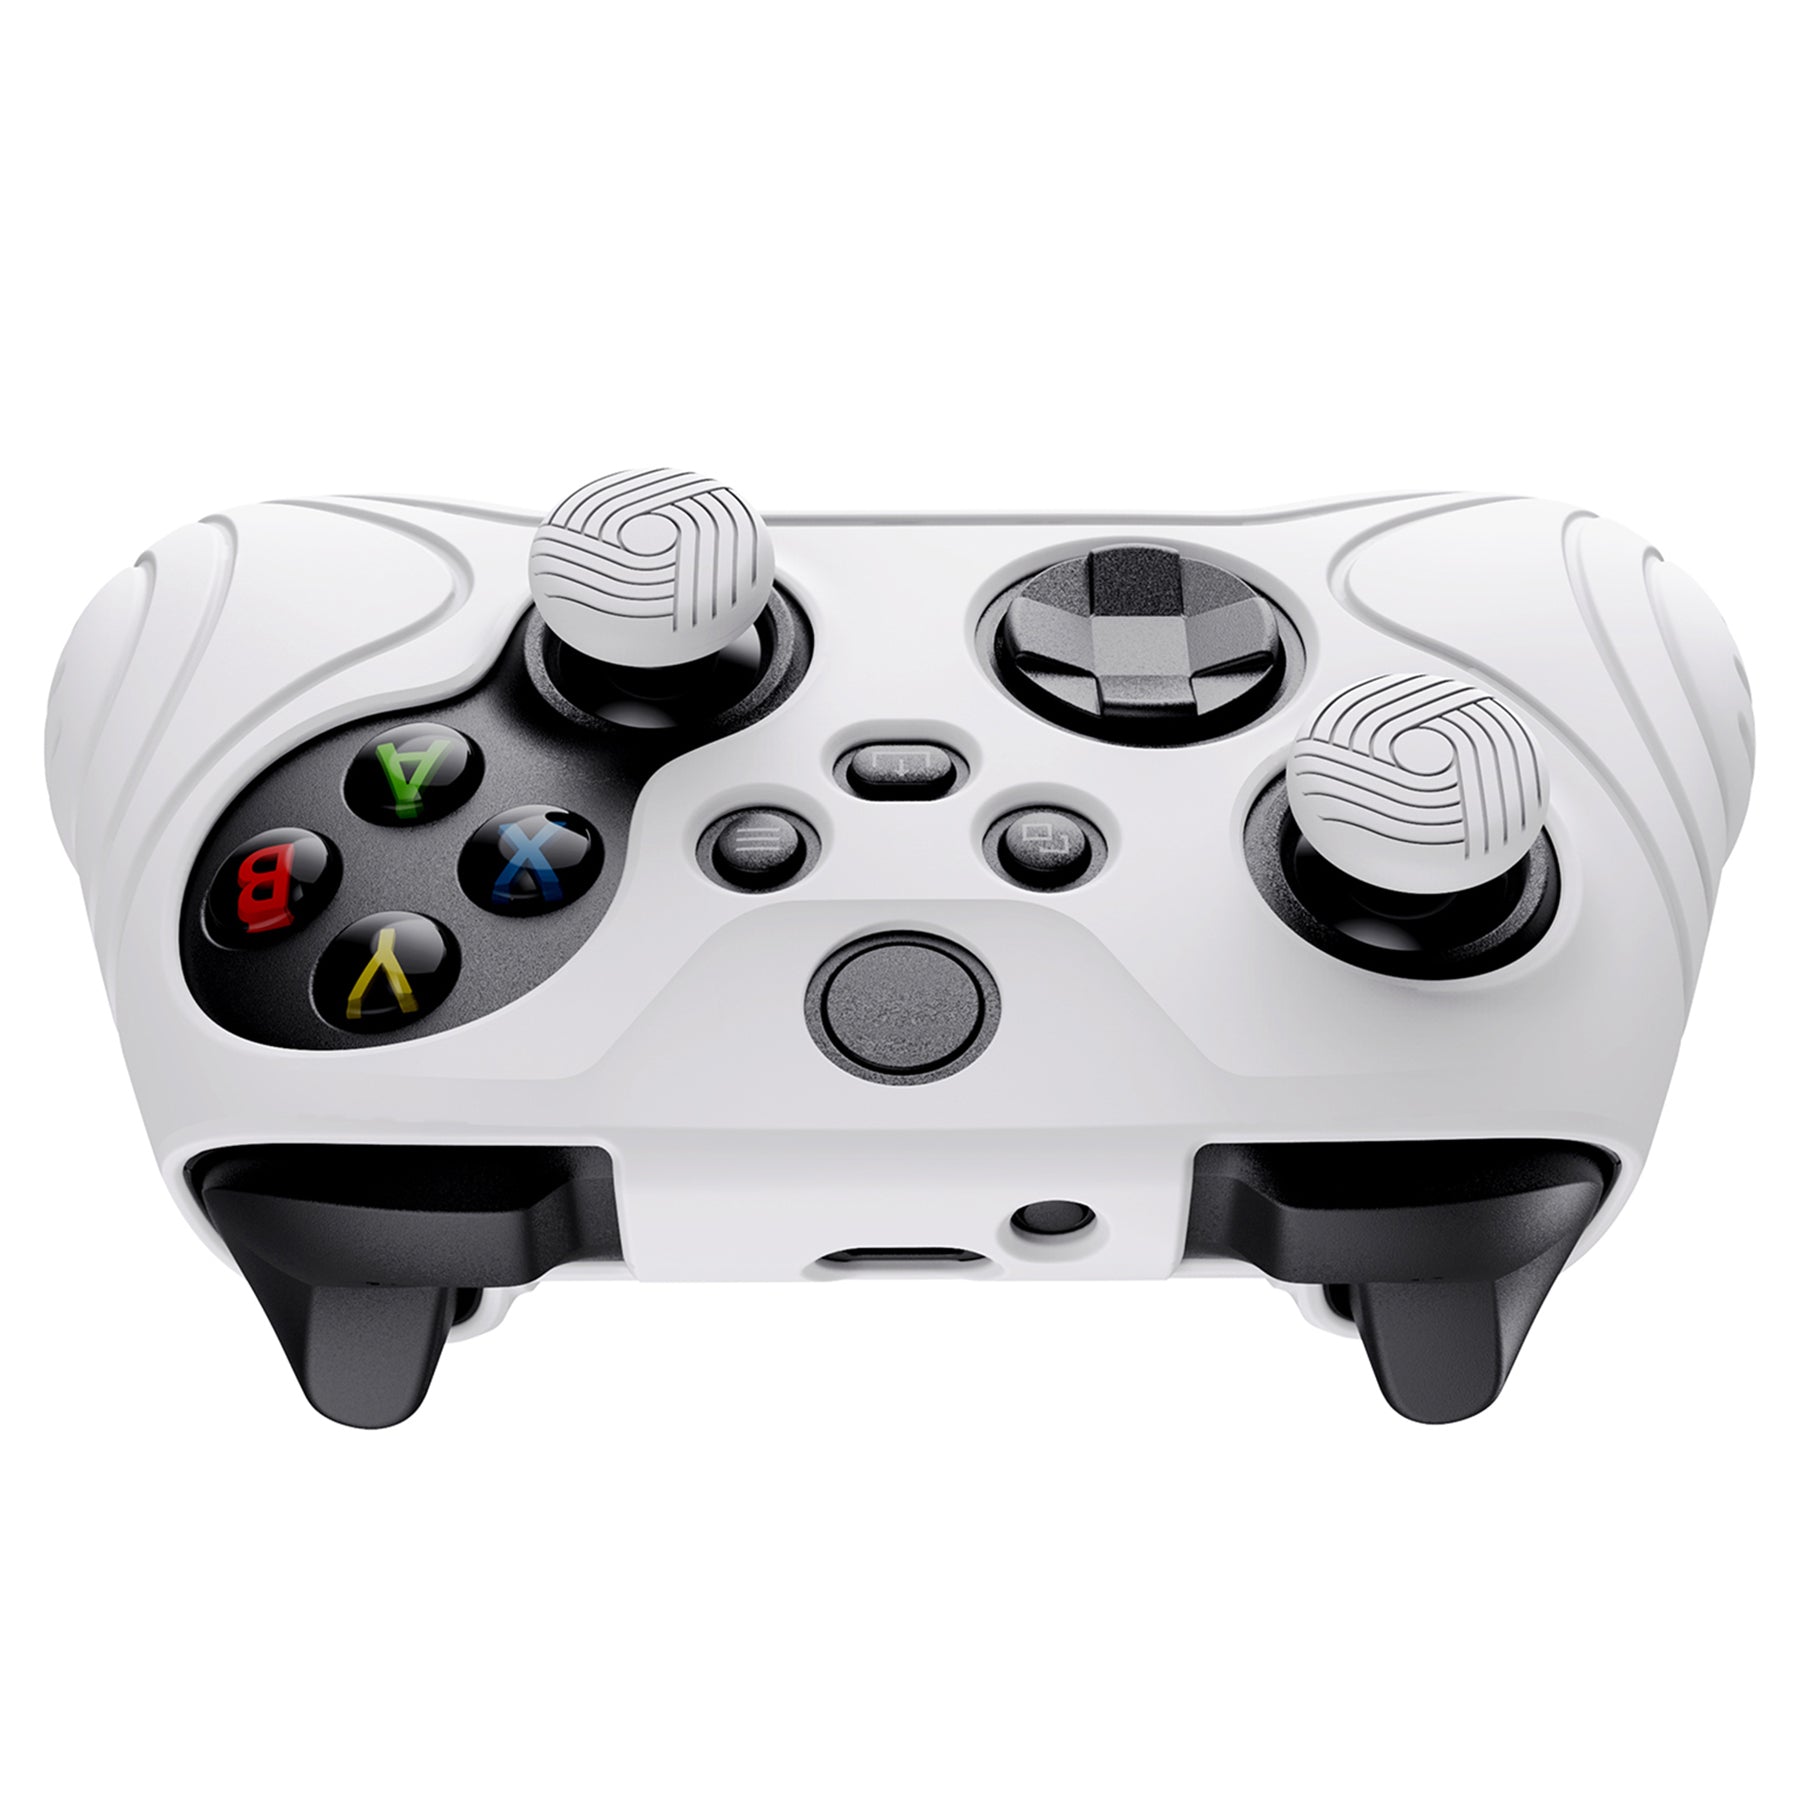 PlayVital Samurai Edition White Anti-slip Controller Grip Silicone Skin, Ergonomic Soft Rubber Protective Case Cover for Xbox Series S/X Controller Model 1914 with White Thumb Stick Caps - WAX3002 PlayVital